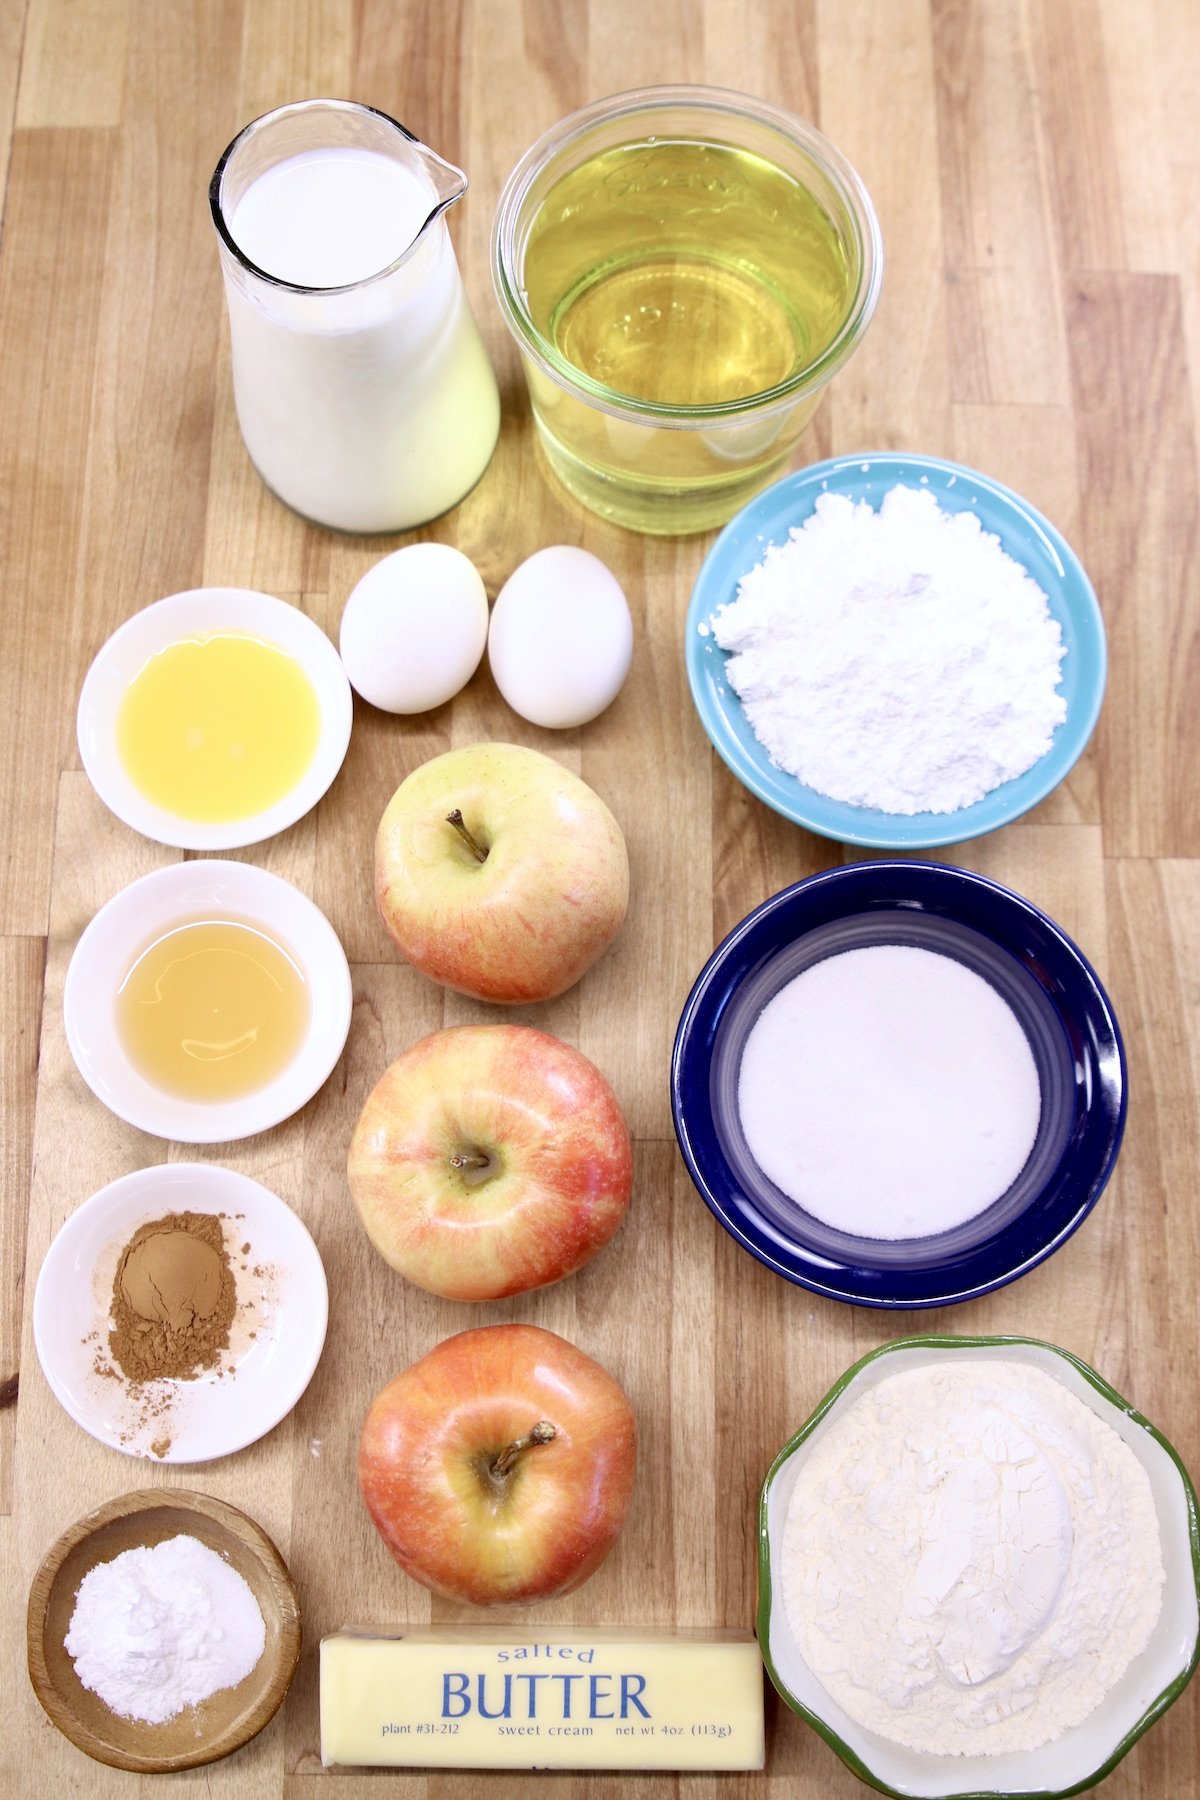 Ingredients for Apple Fritters